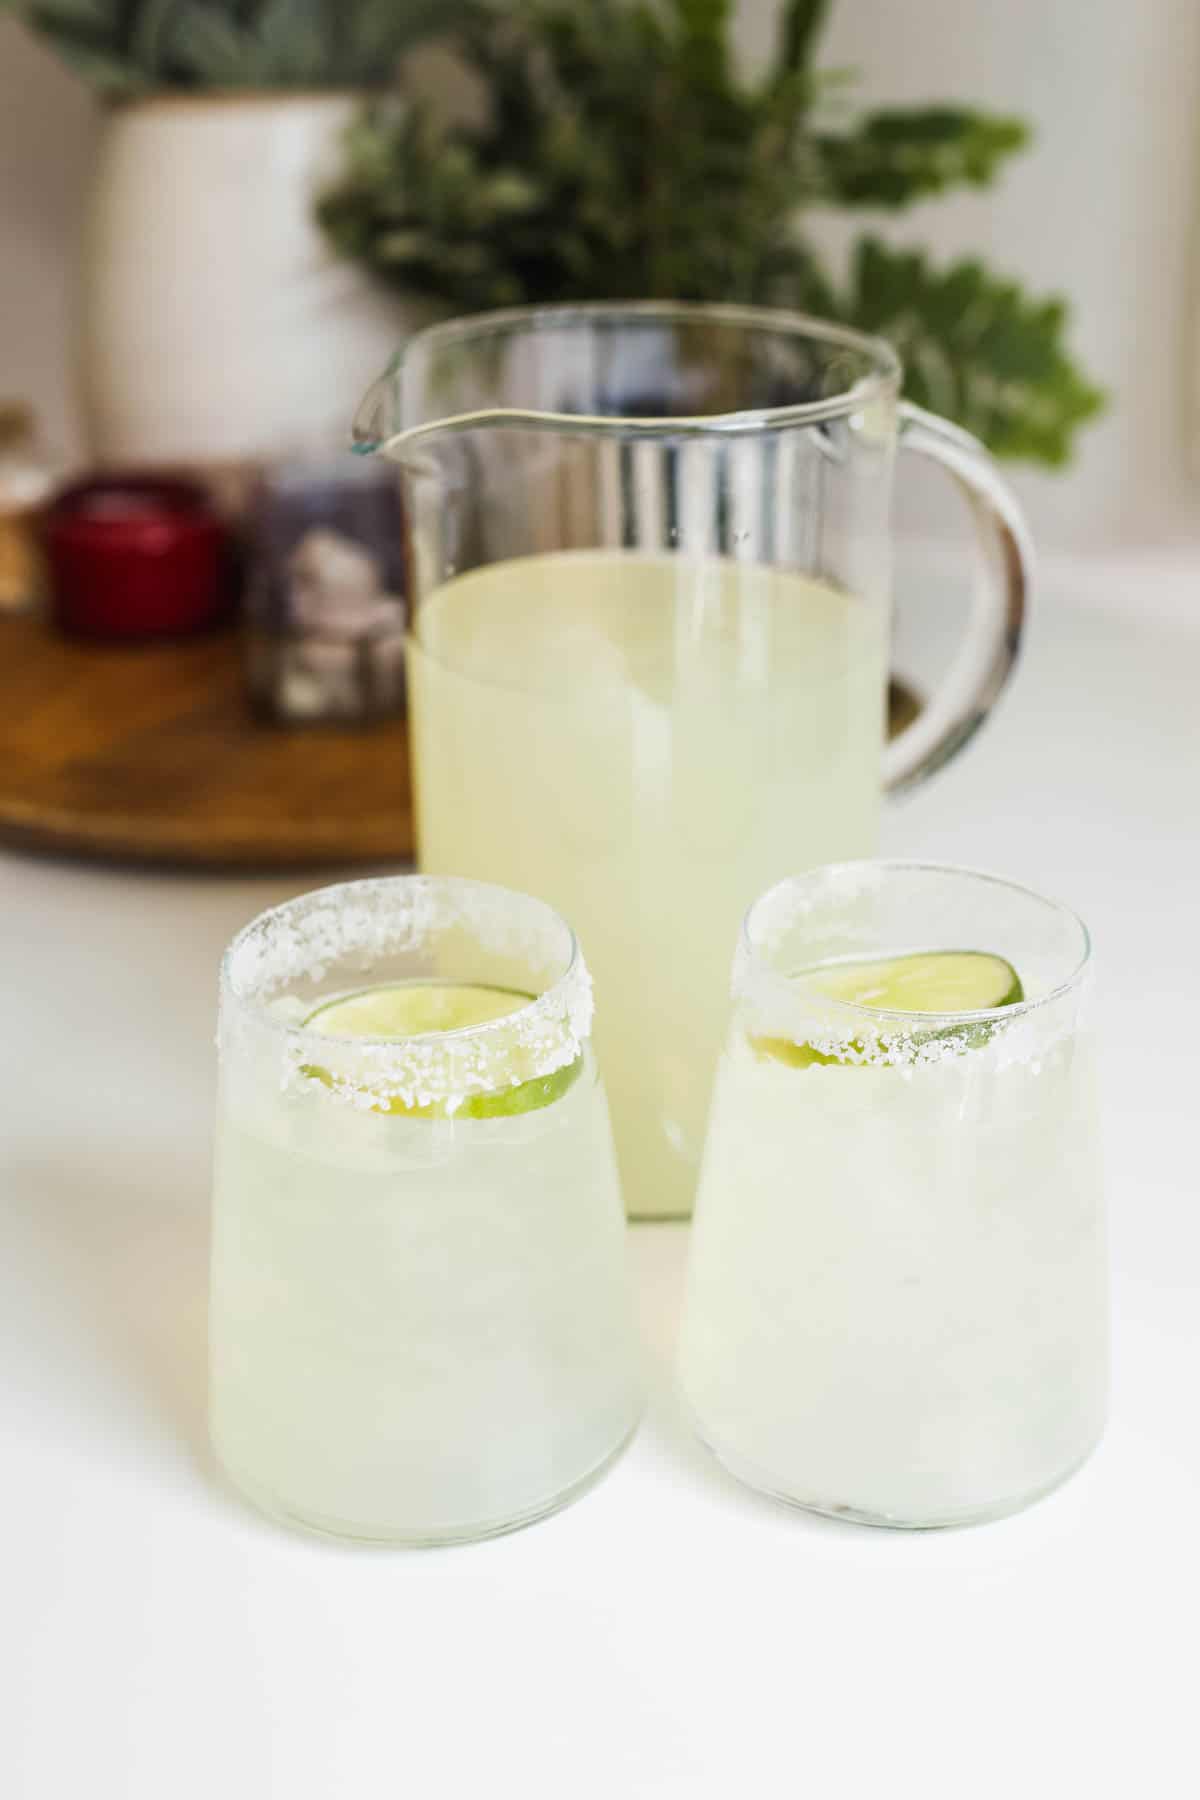 A pitcher of margaritas on a table with two salt rimmed glasses in front of it with margaritas.